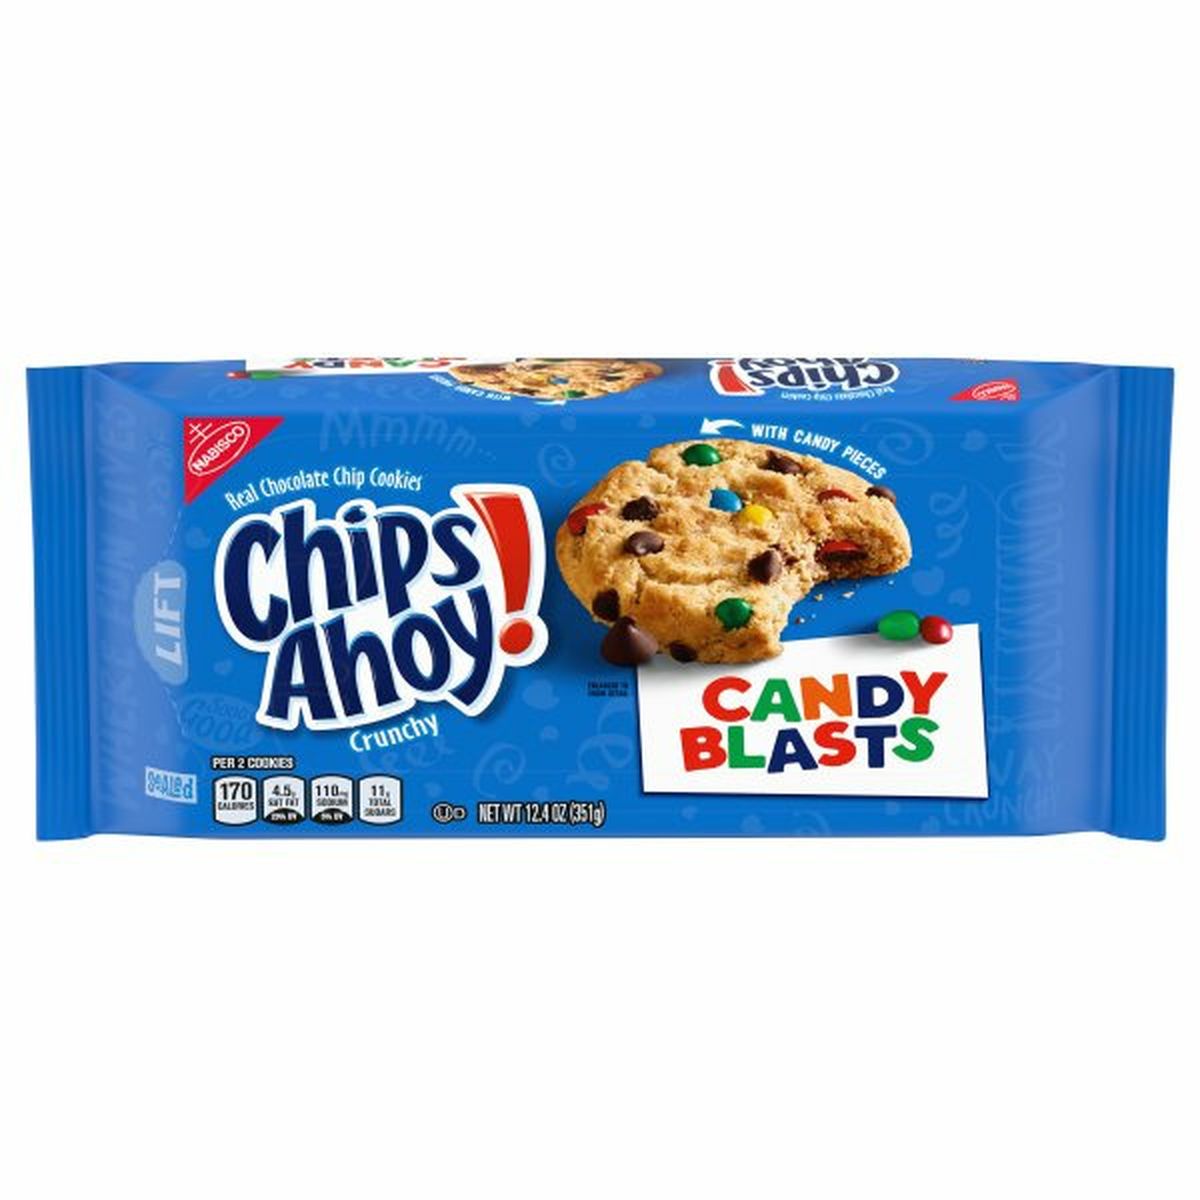 Calories in Chips Ahoy! Cookies, Candy Blasts, Chocolate Chip